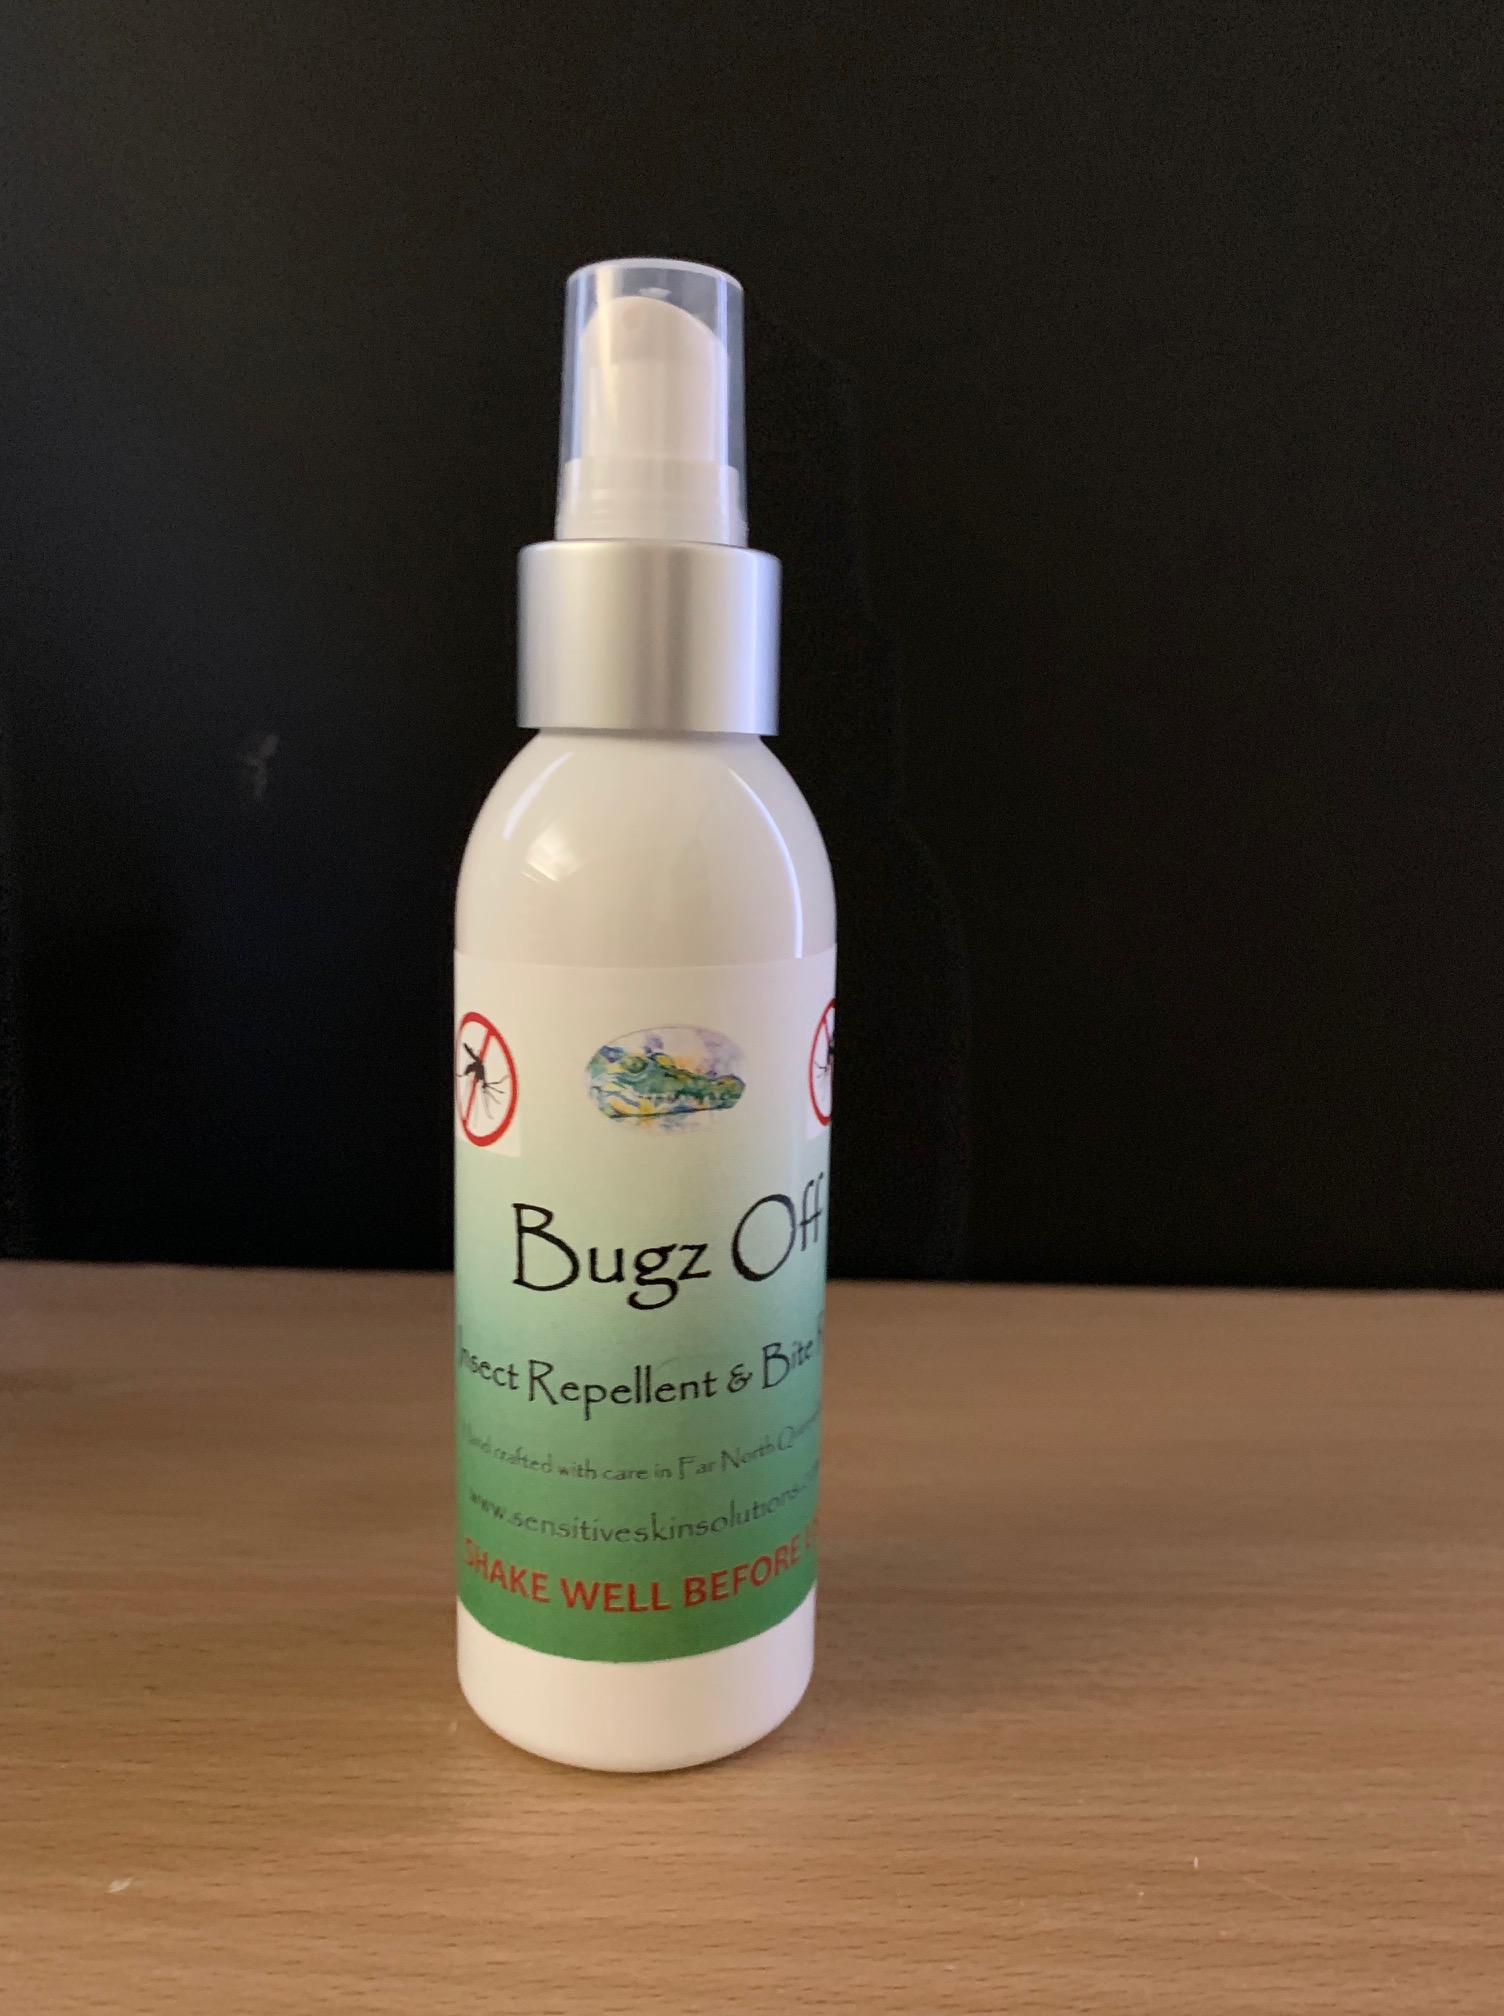 Bugz Off Insect Repellent & Bite Relief – Sensitive Skin Solutions